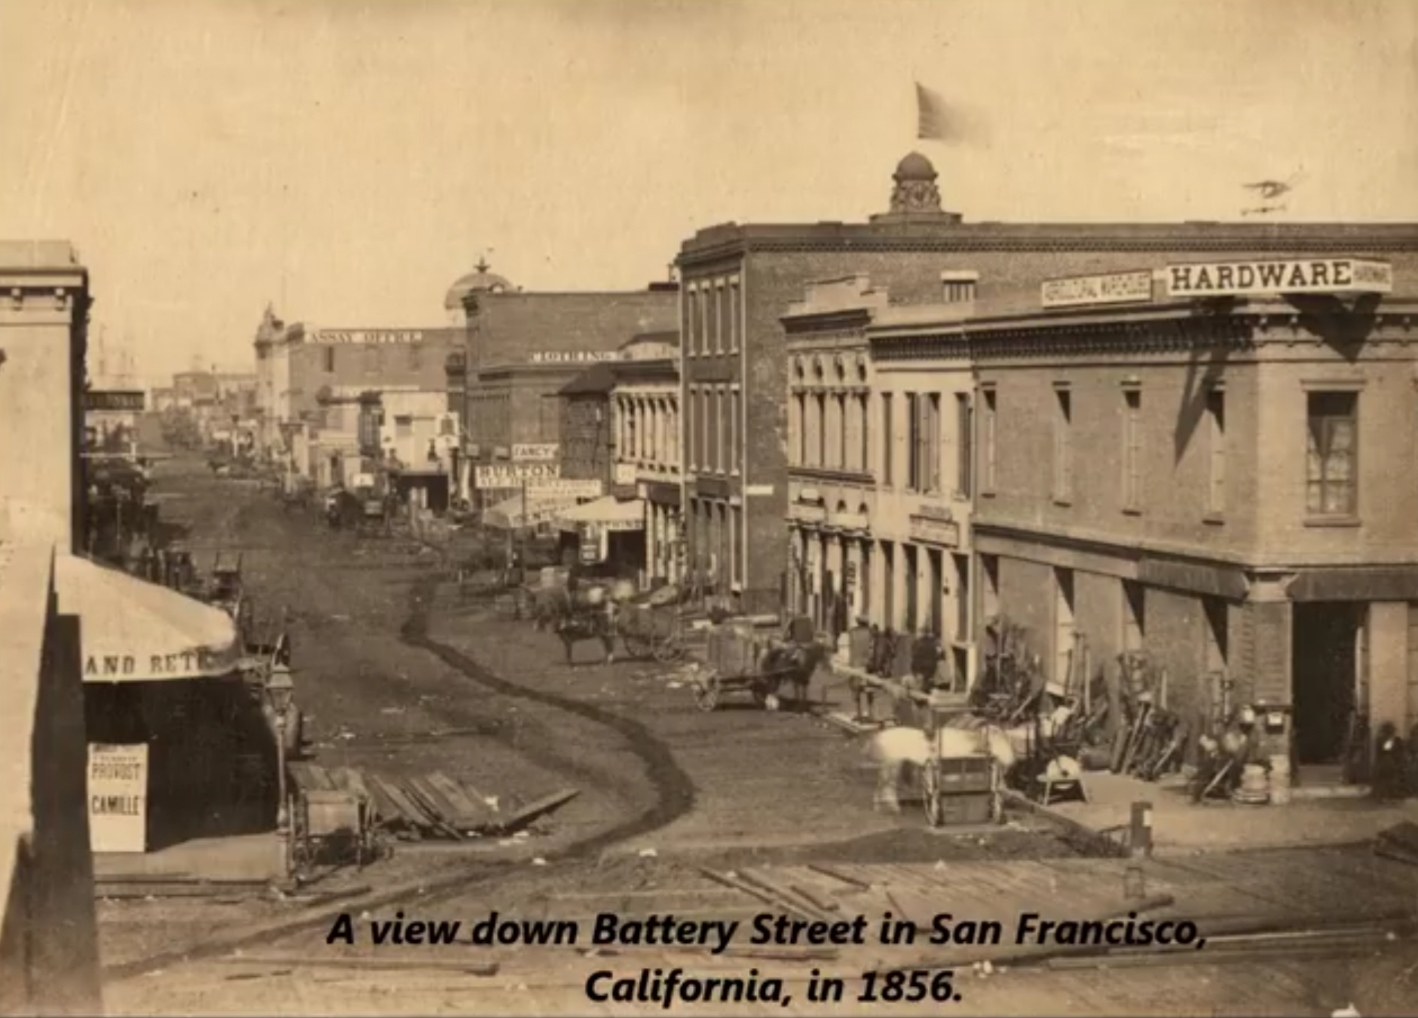 san francisco 1850 - Die Hardware Se And Rei Civile A view.down Battery Street in San Francisco, California, in 1856.